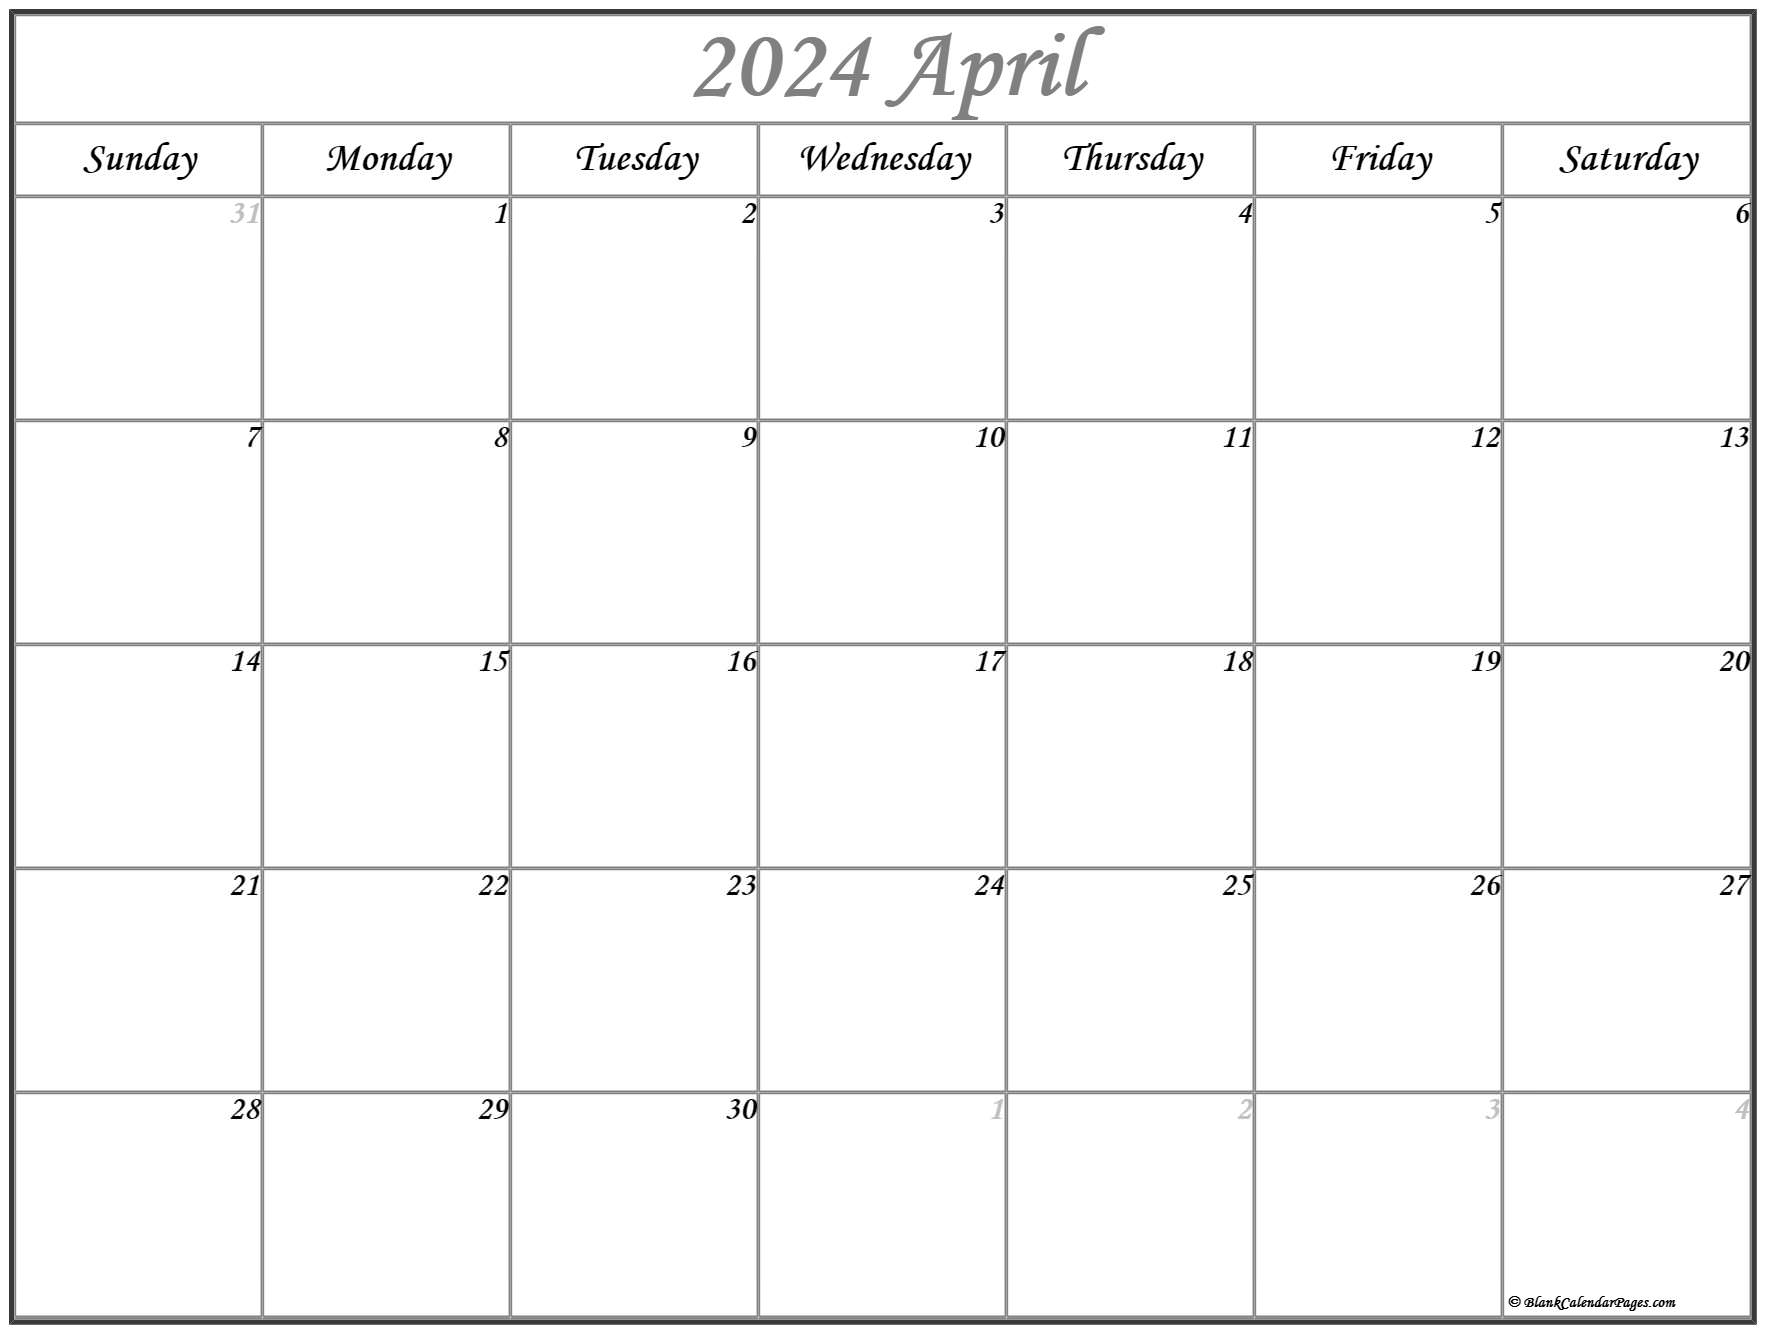 Blank April Calendar 2024 A Clean Slate for Planning and Organizing